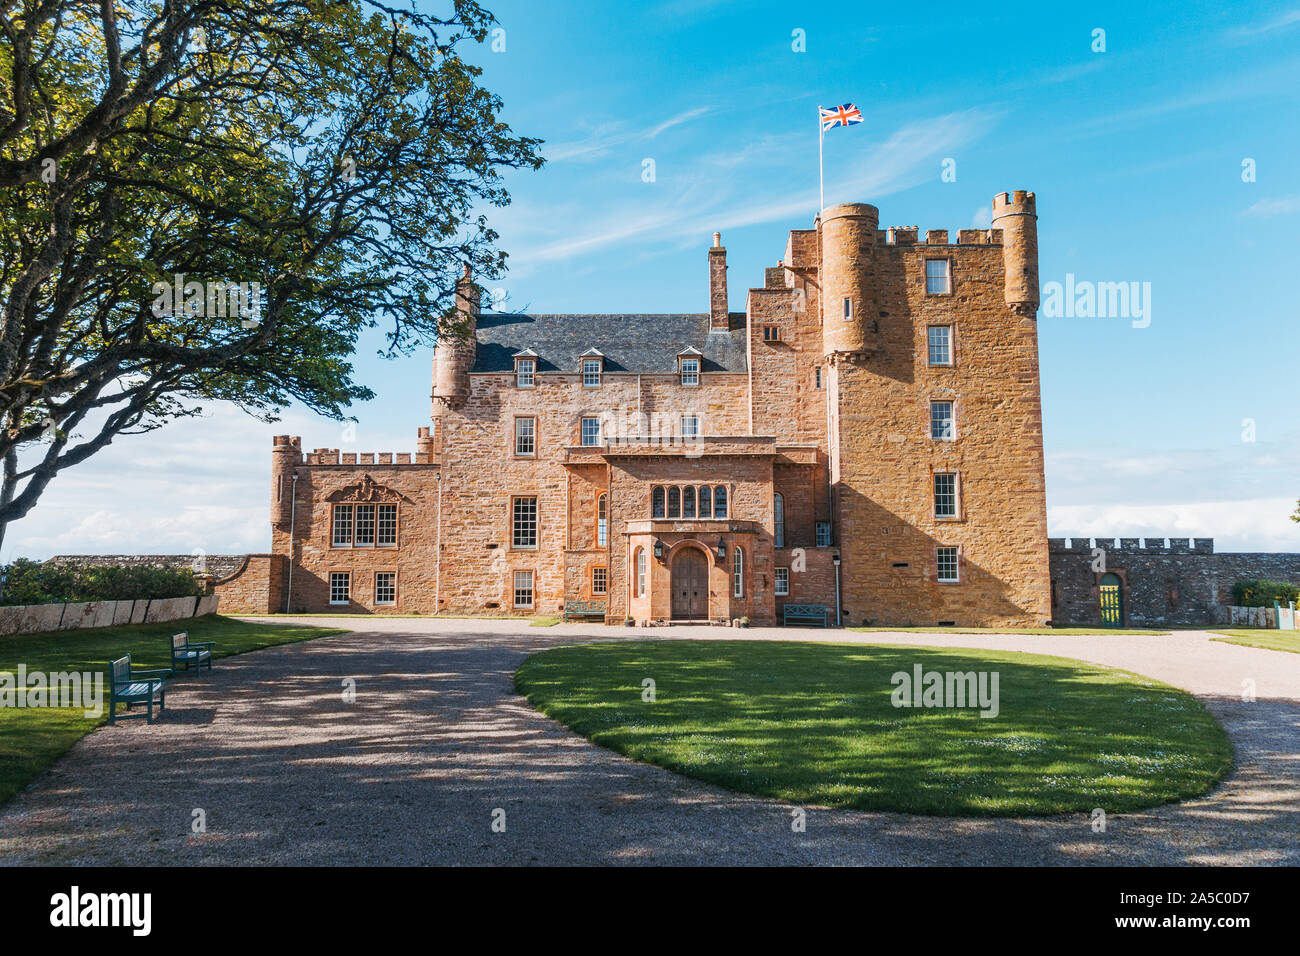 Entrance to the Castle of Mey, built in the mid 16th century, bought and restored in the 1950s by Queen Elizabeth The Queen Mother Stock Photo